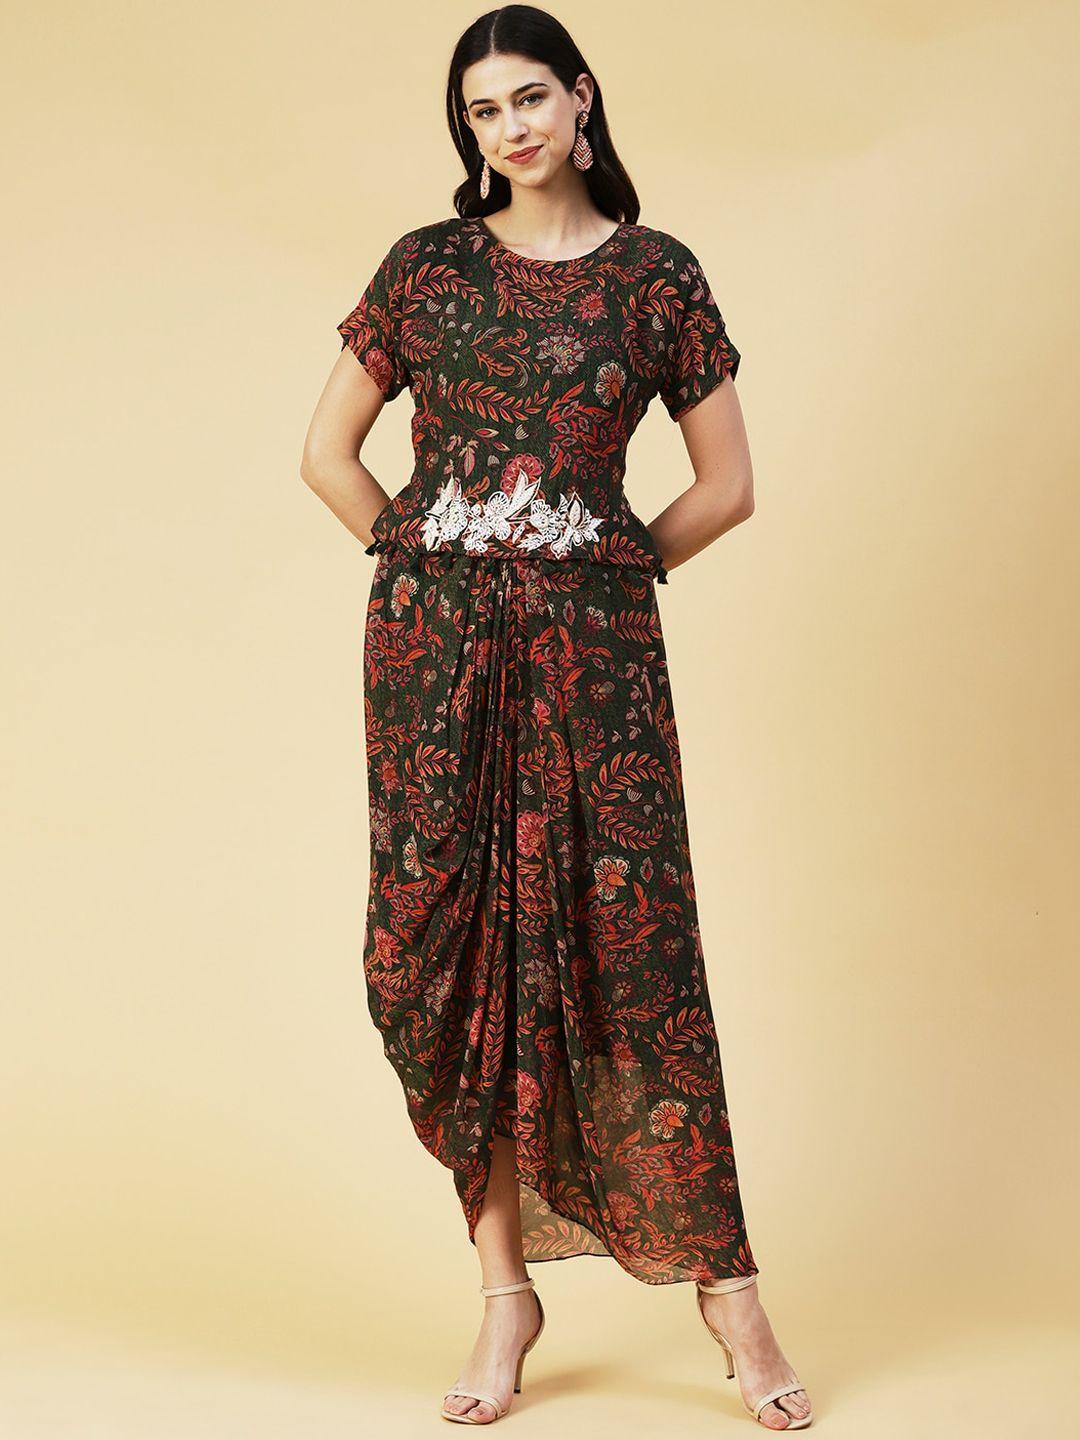 envy me by fashor floral printed top & draped style skirt